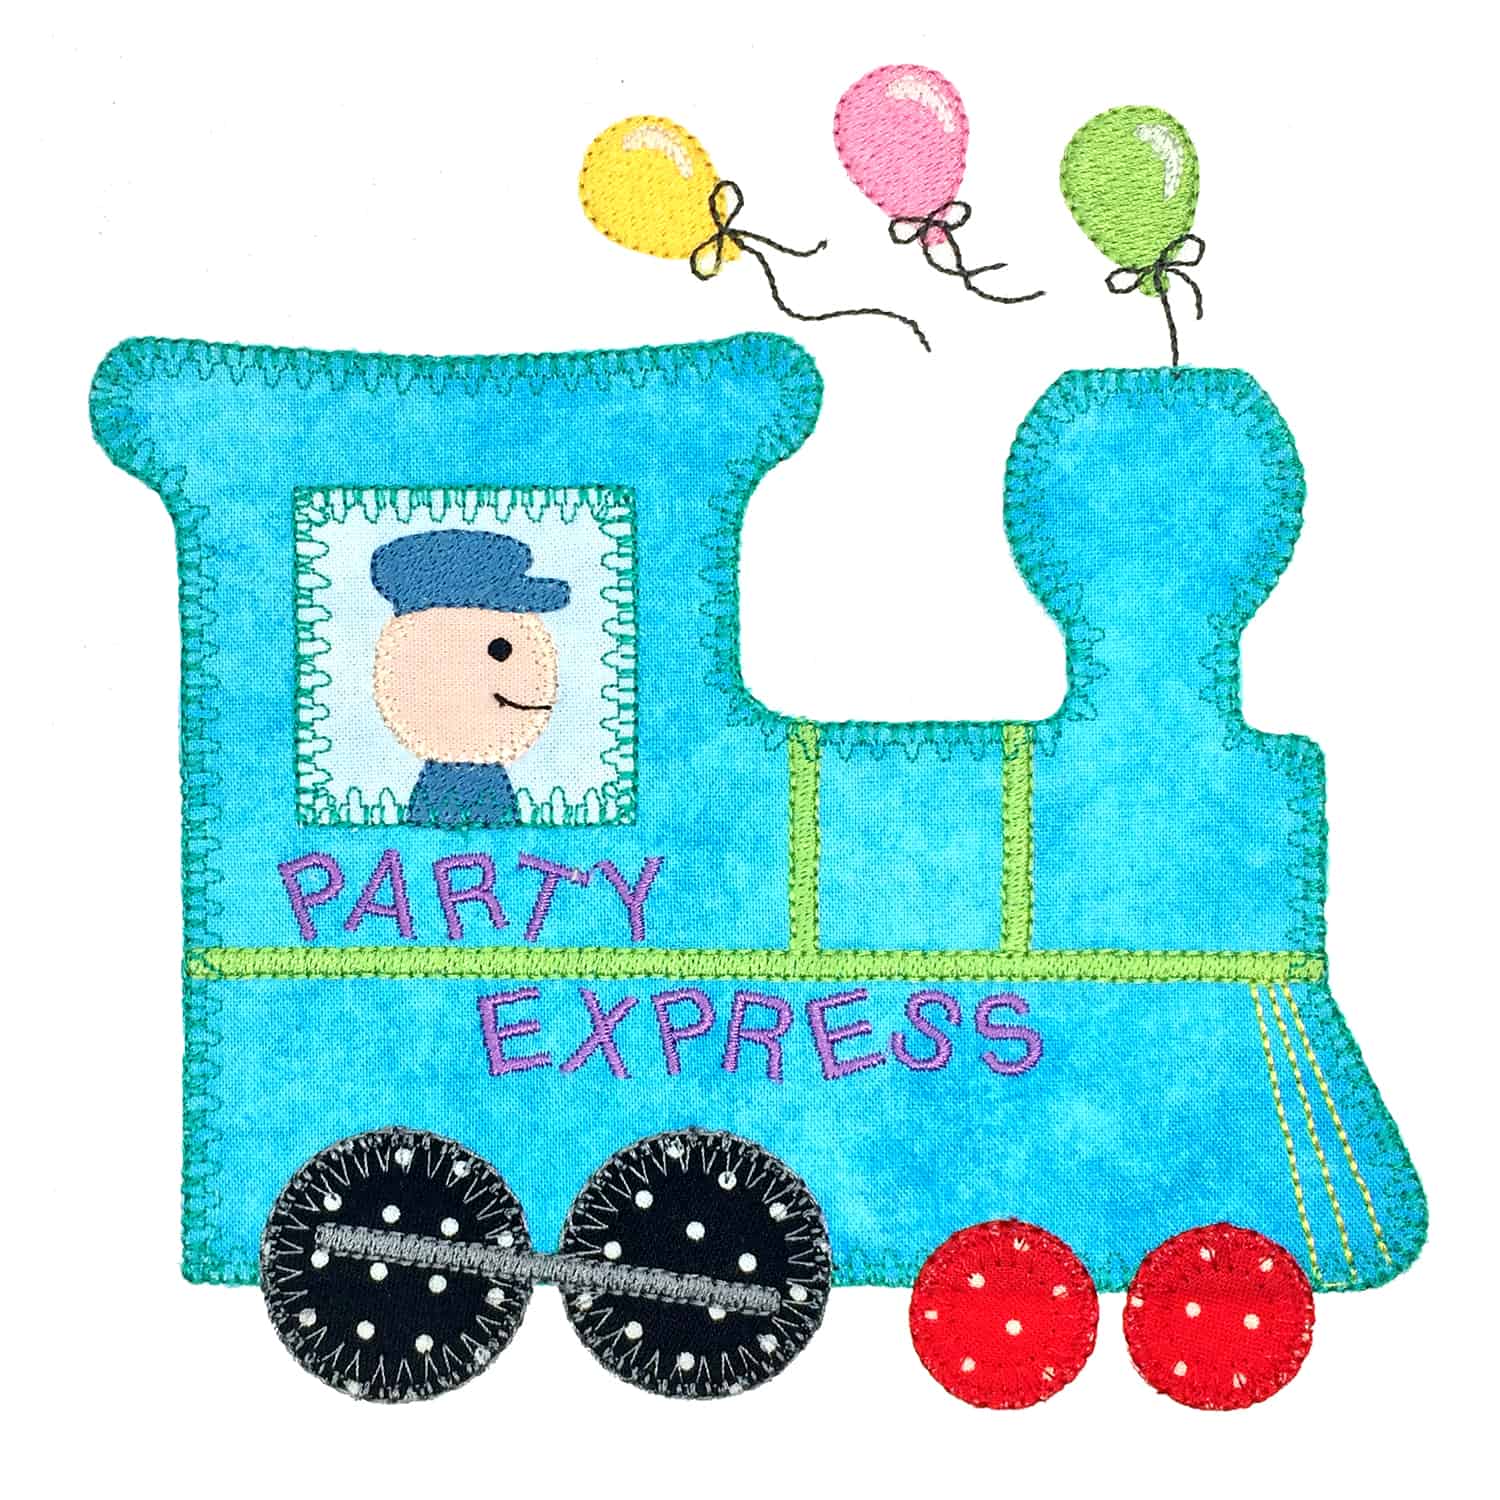 go! party train embroidery pattern by v stitch designs